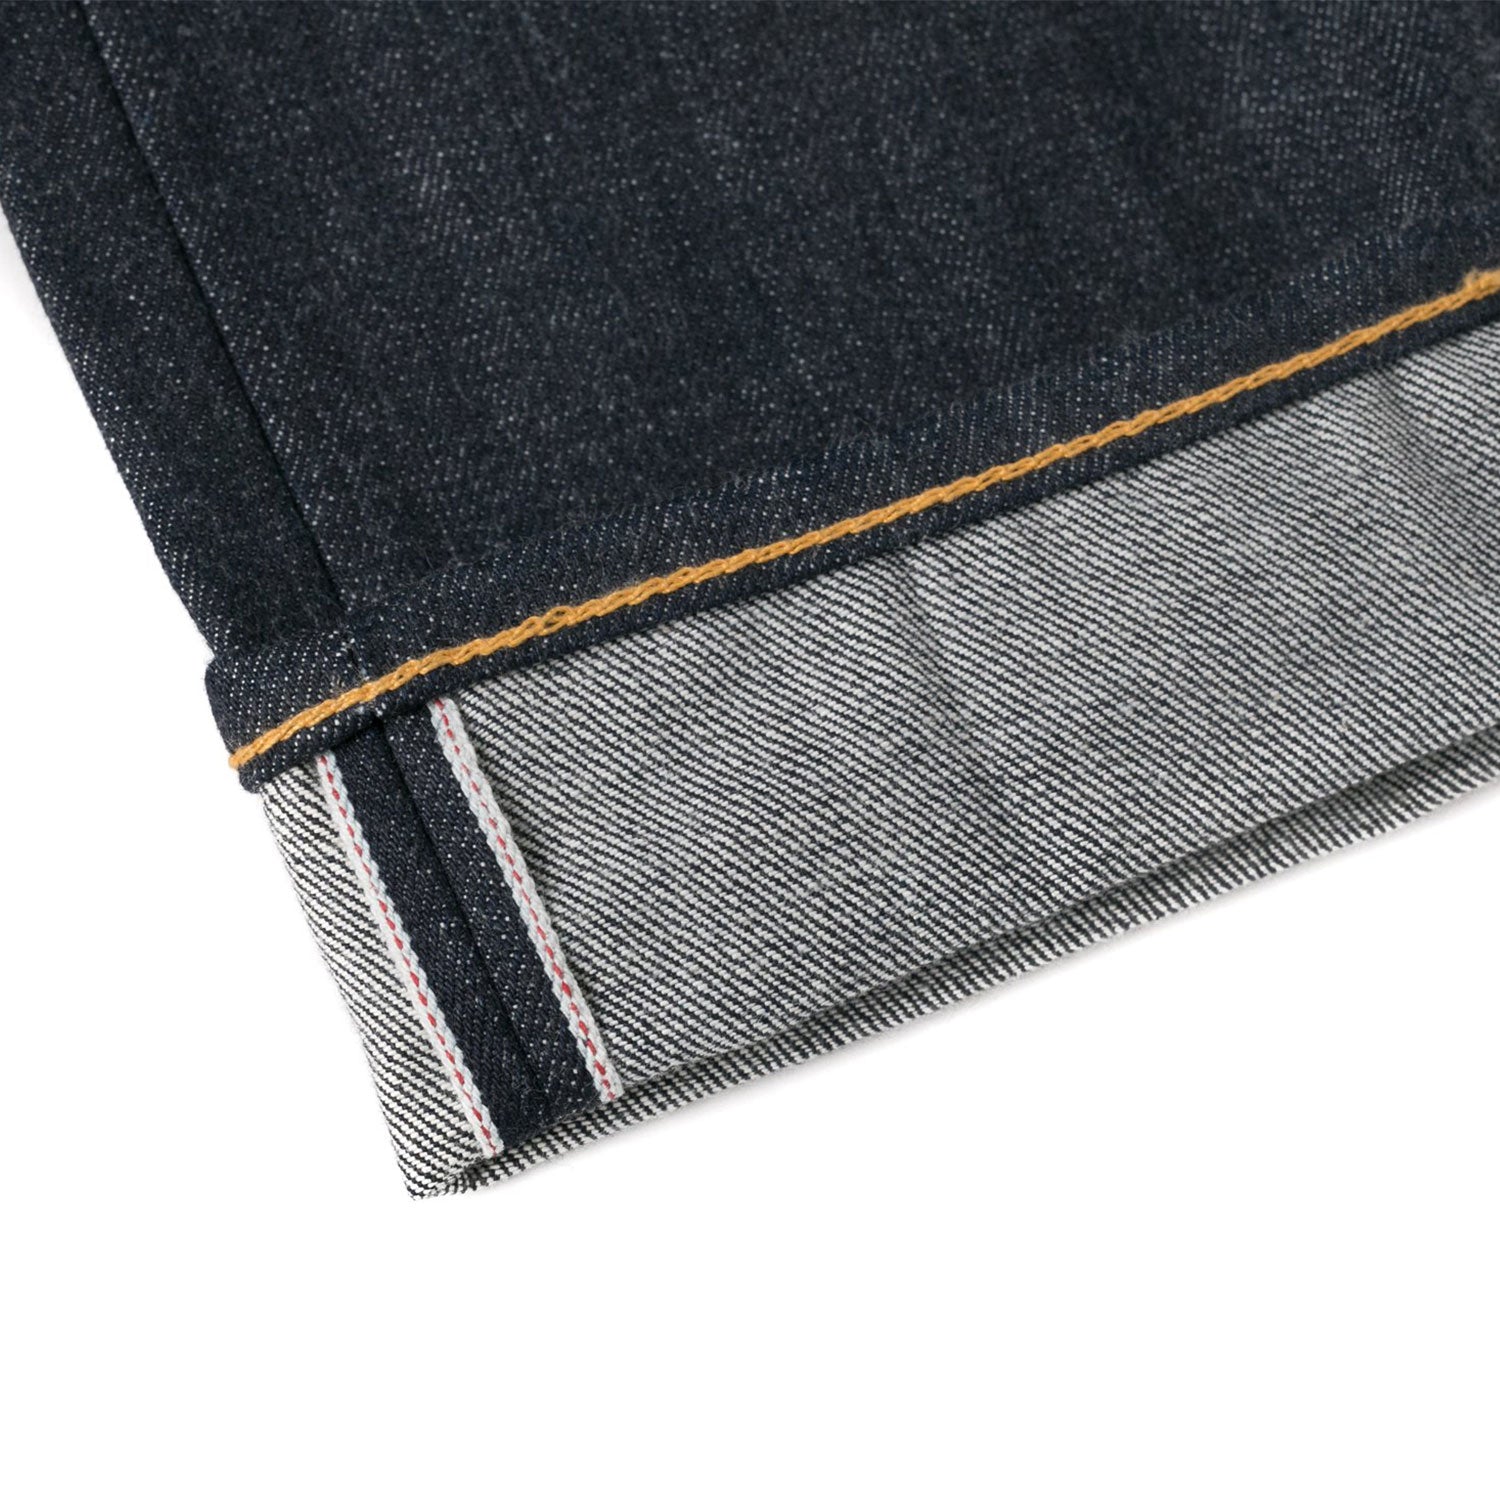 Closeup of cuffed jeans showing chainstitch hem selvedge detail